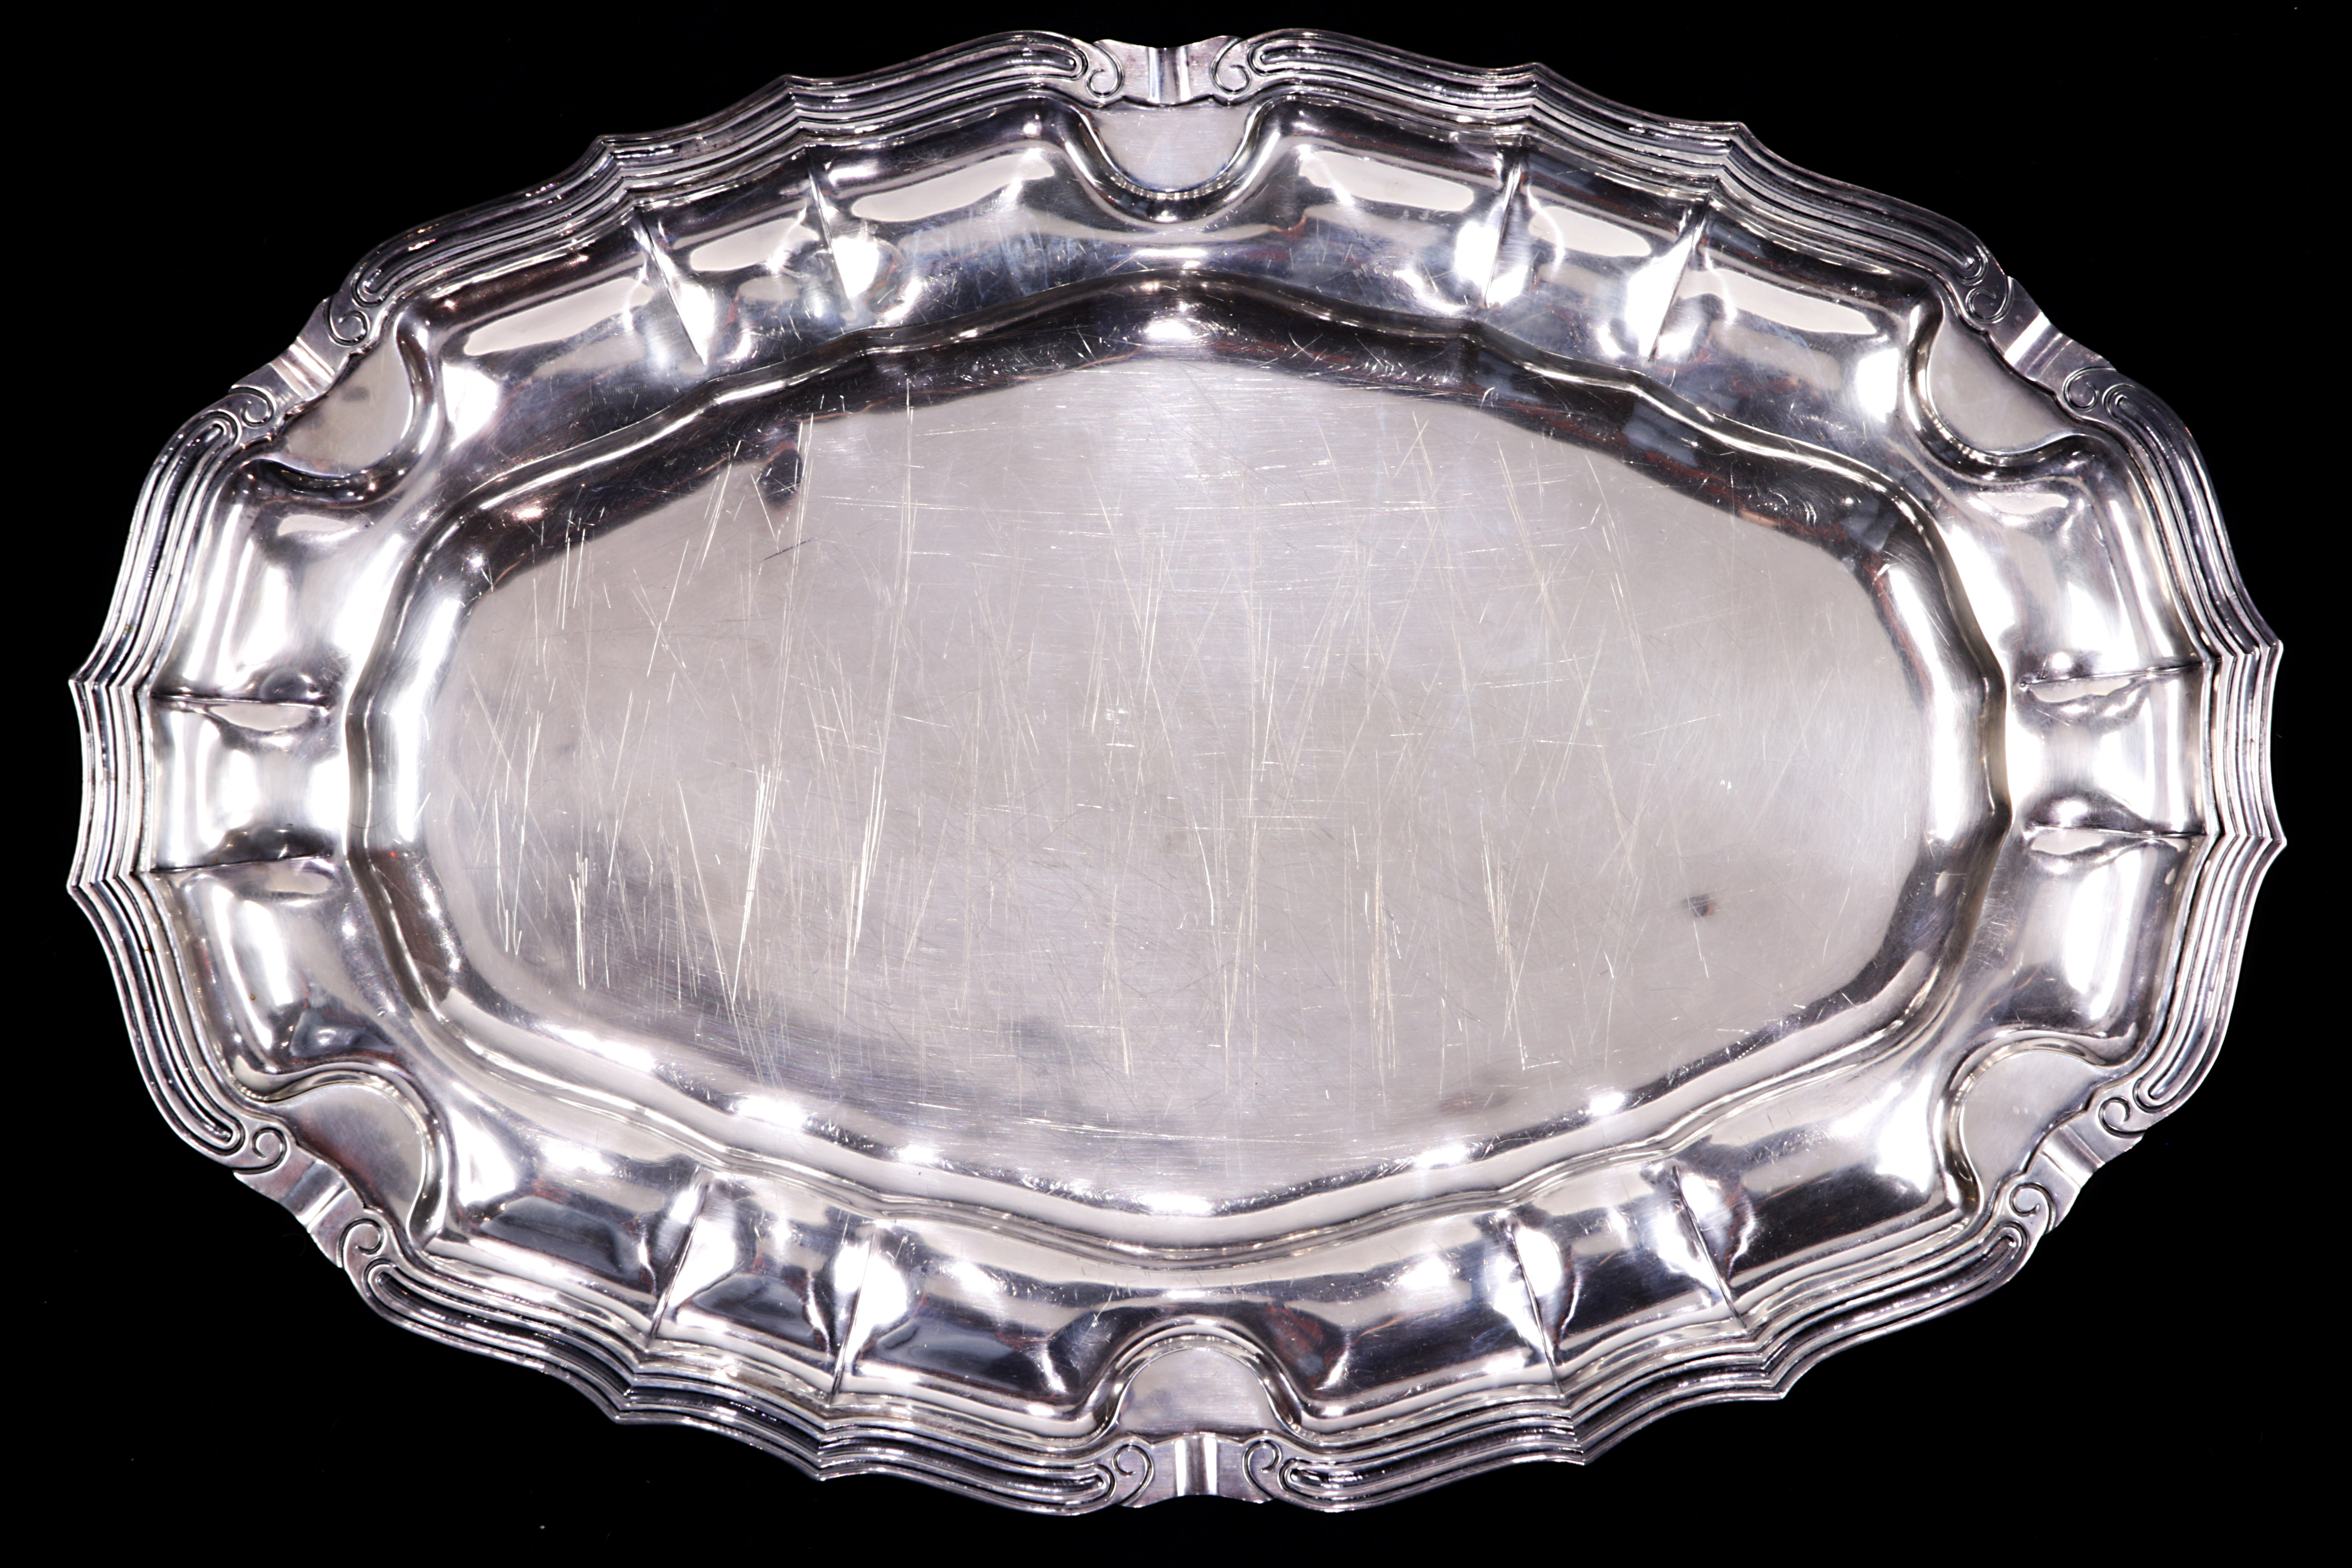 A Sanborns Mexico sterling tray